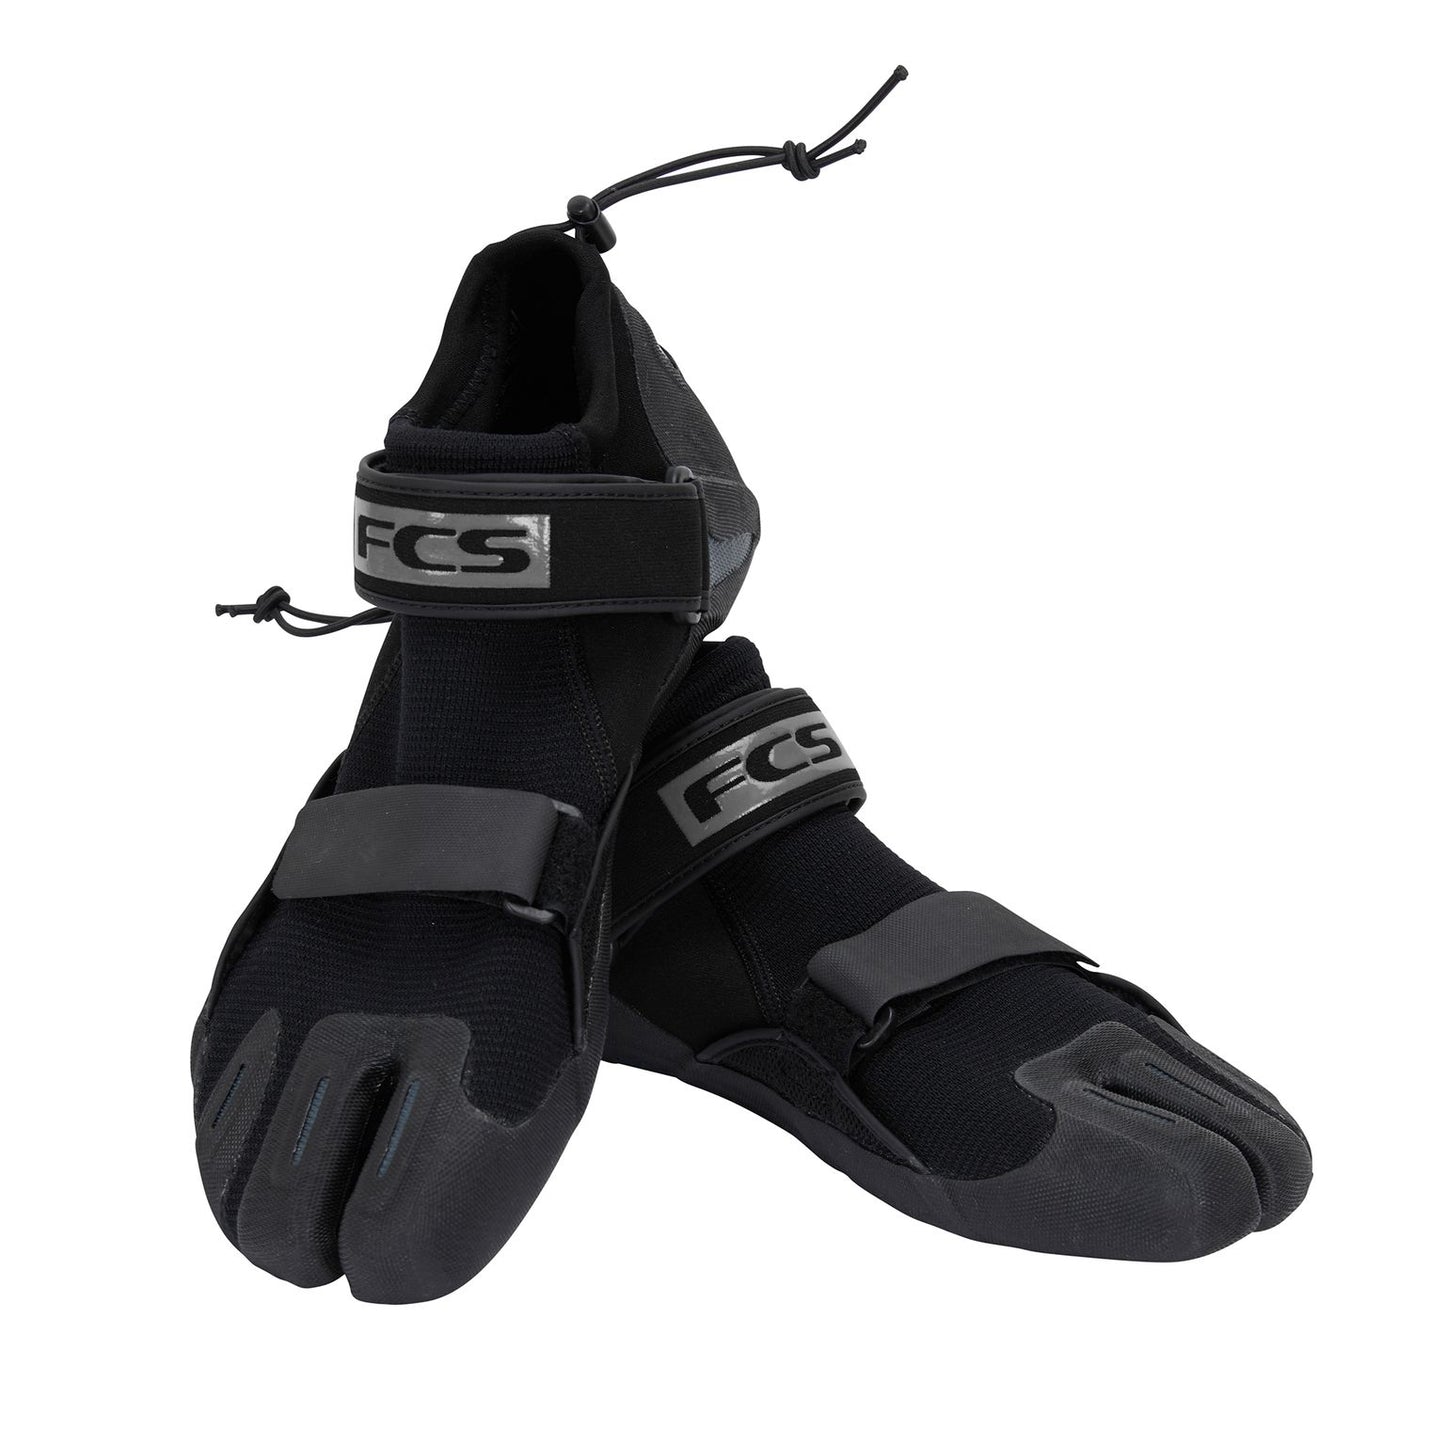 FCS SP2 Reef Boots pair in black